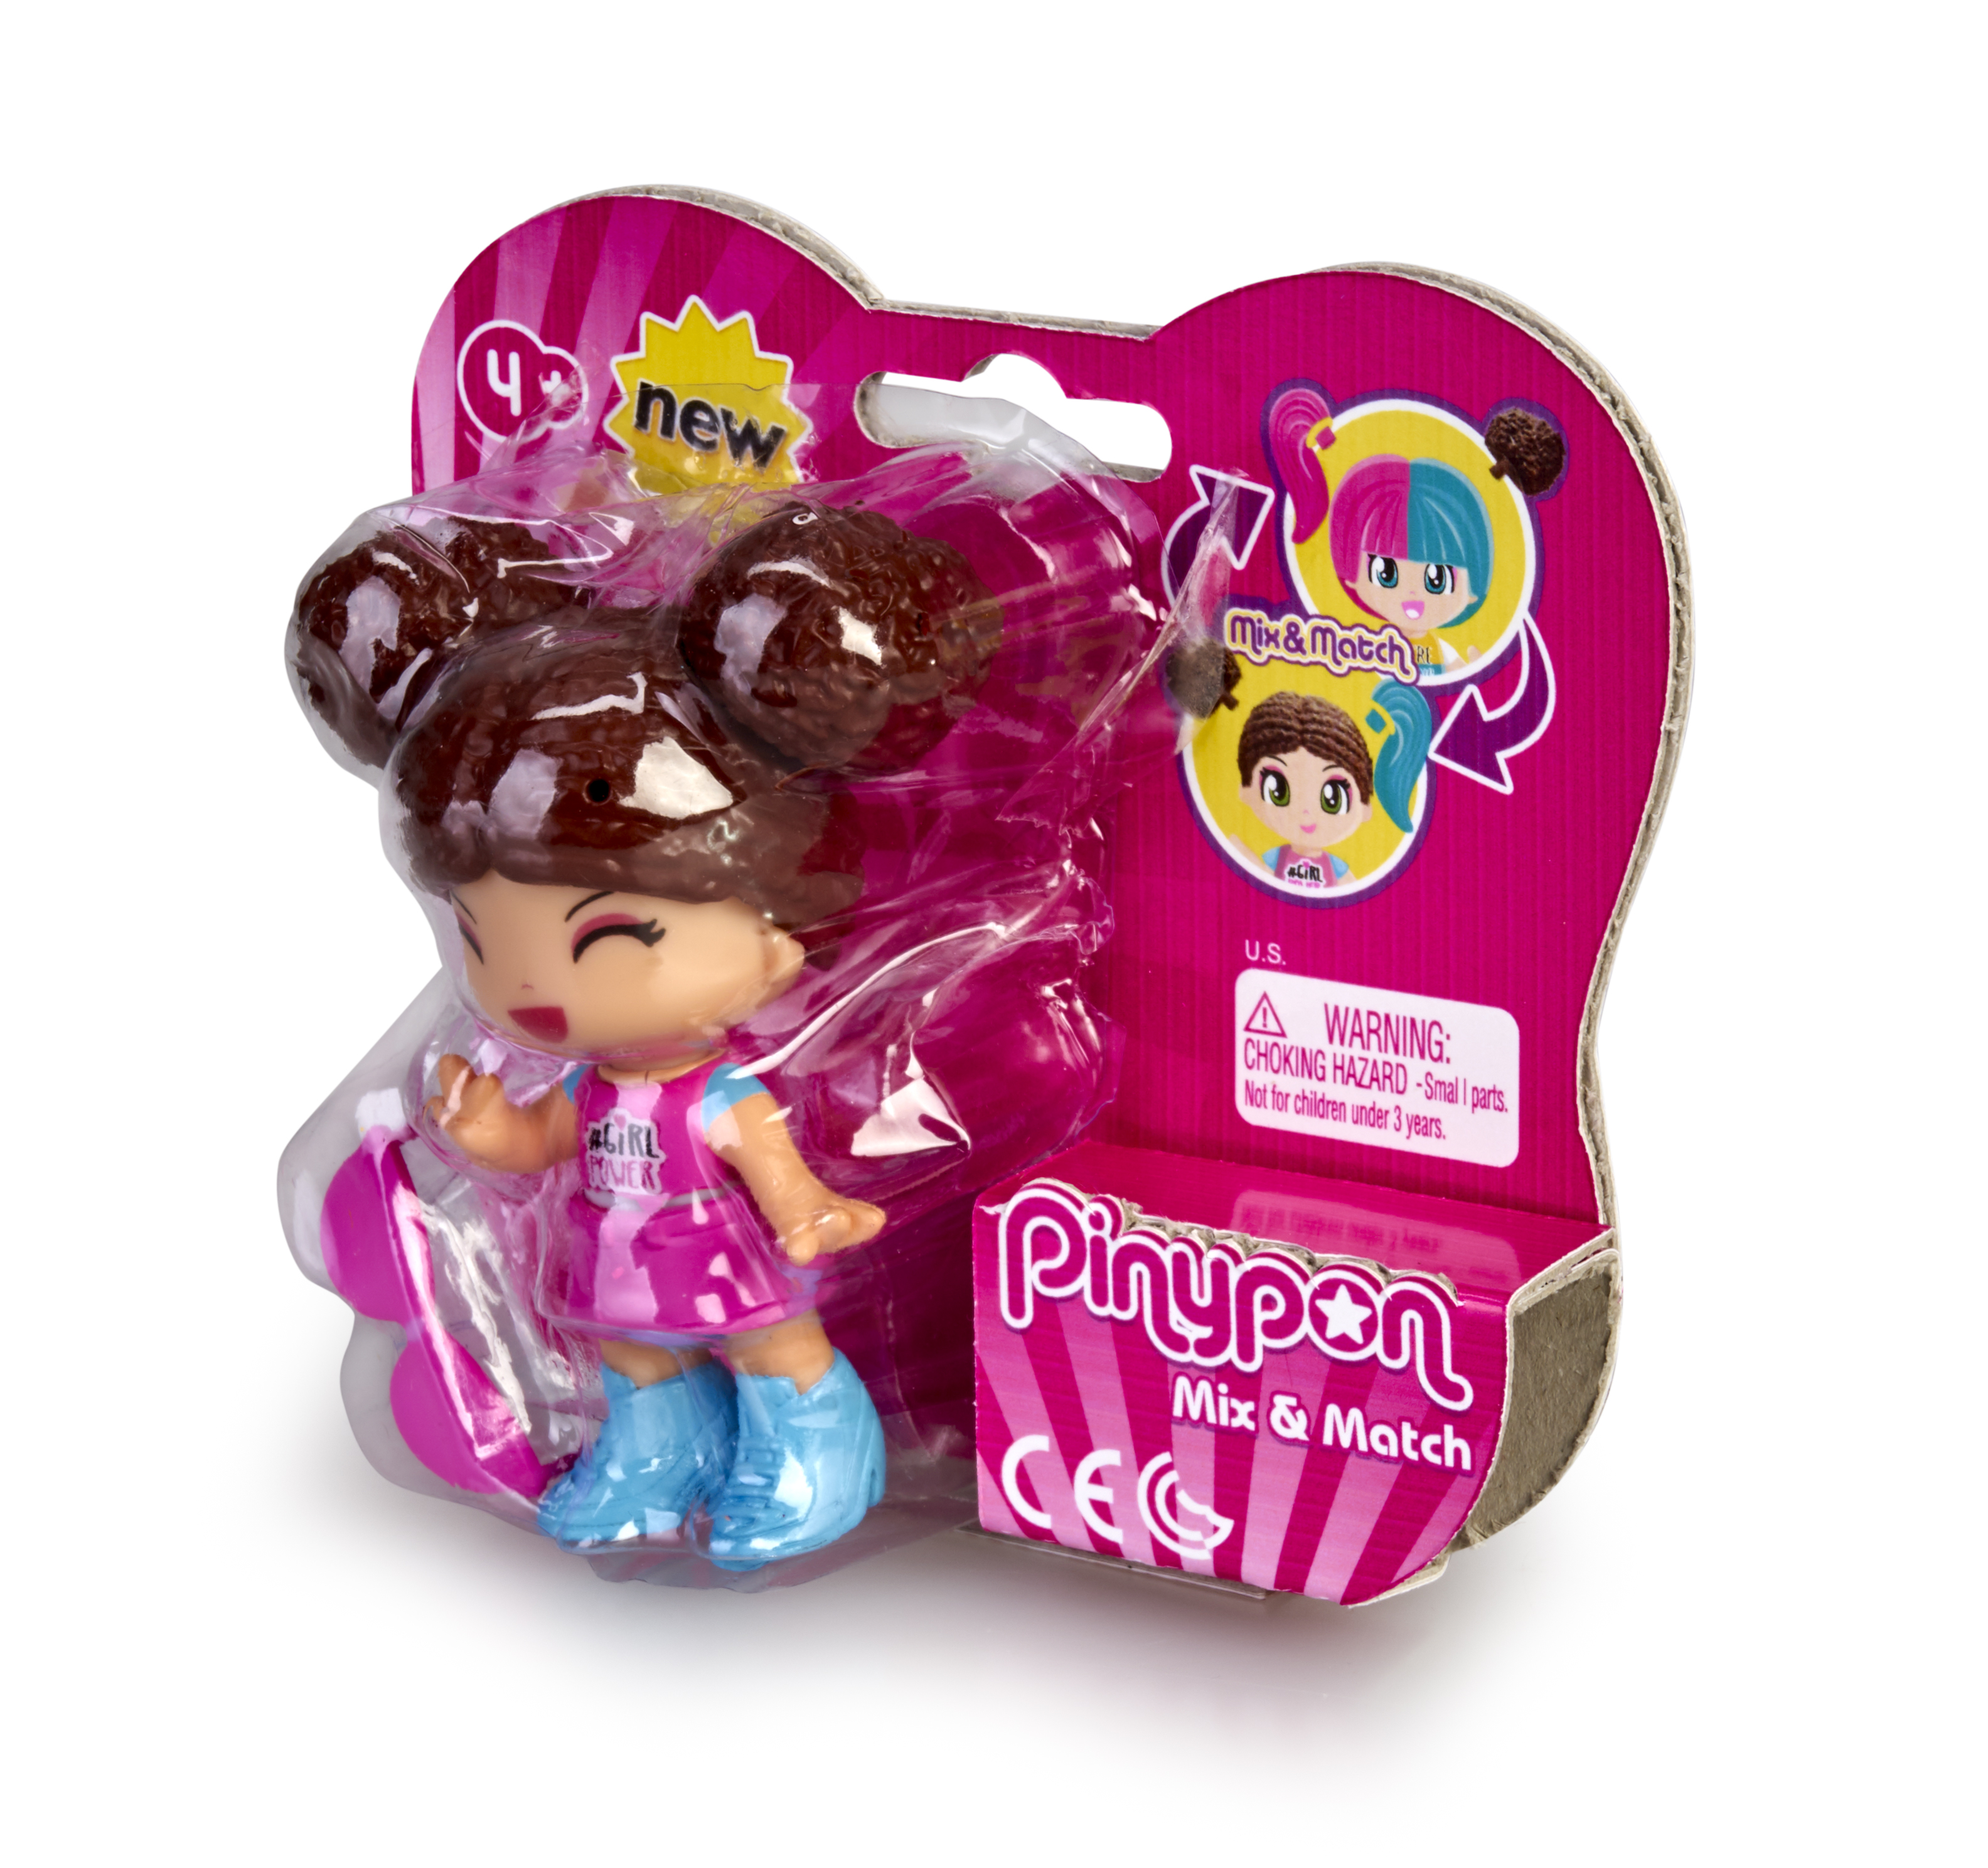 PINYPON NEW LOOK IND FIG. 15560